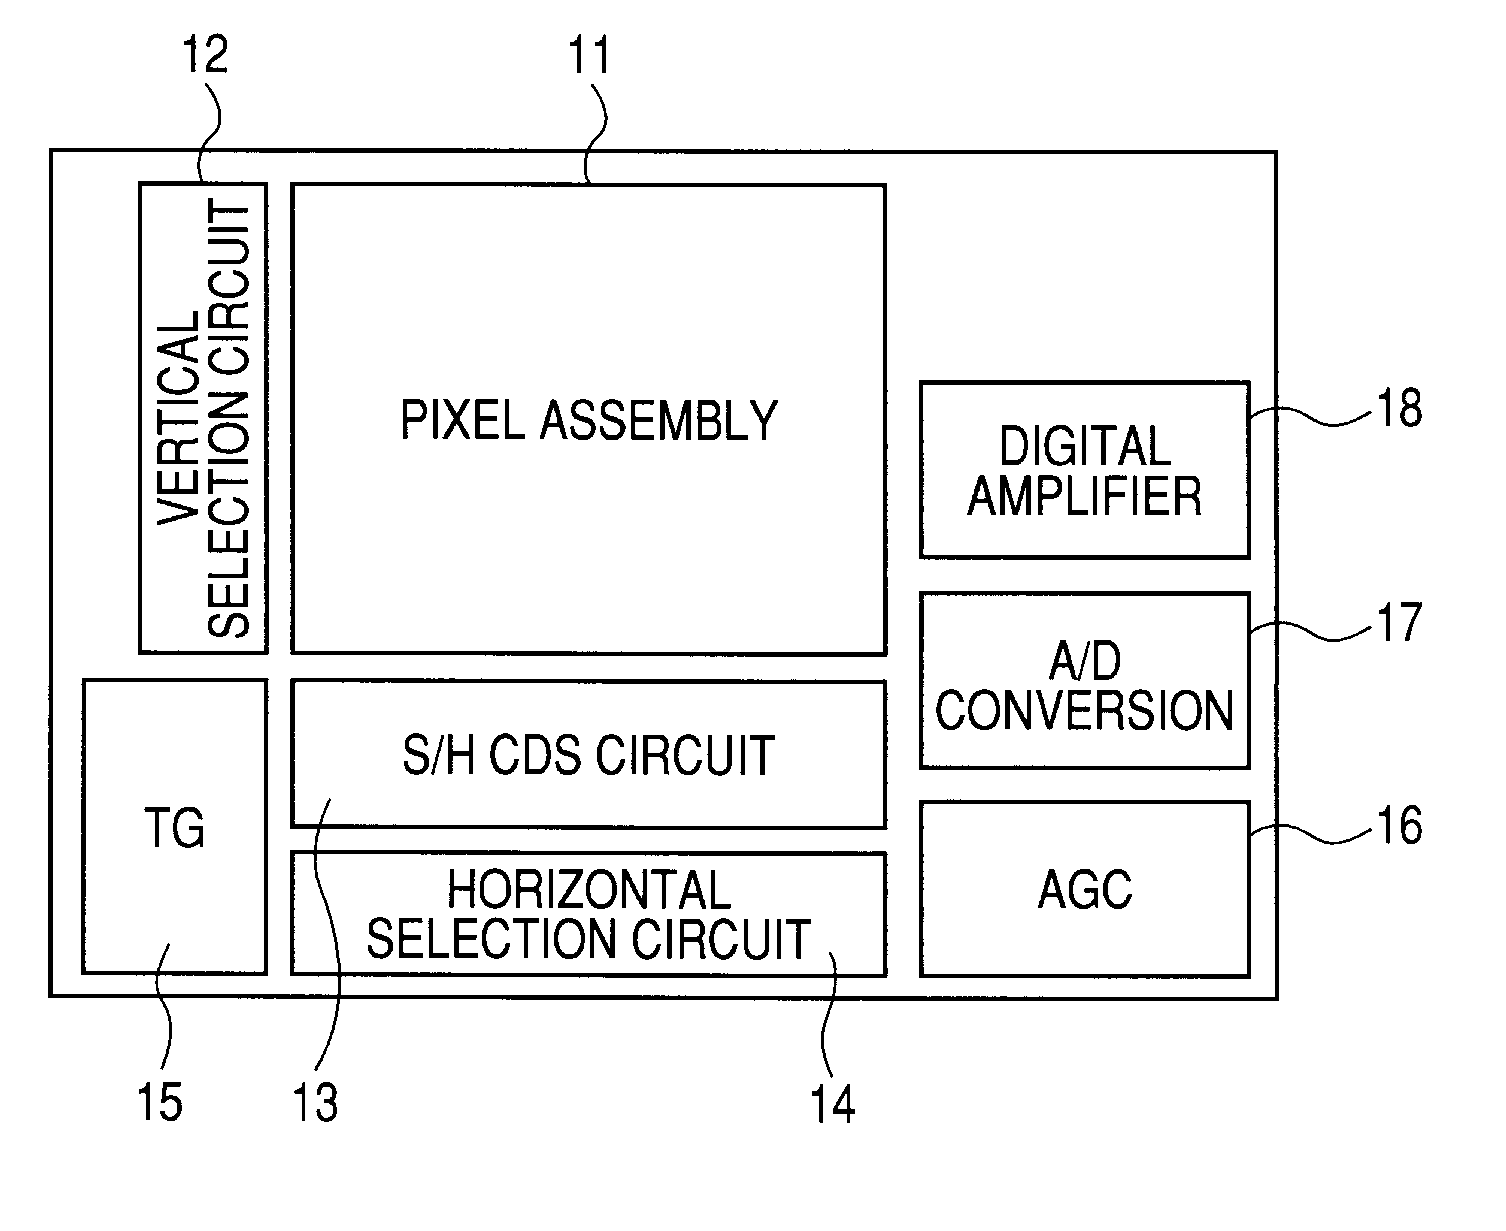 Solid-state imaging apparatus and camera